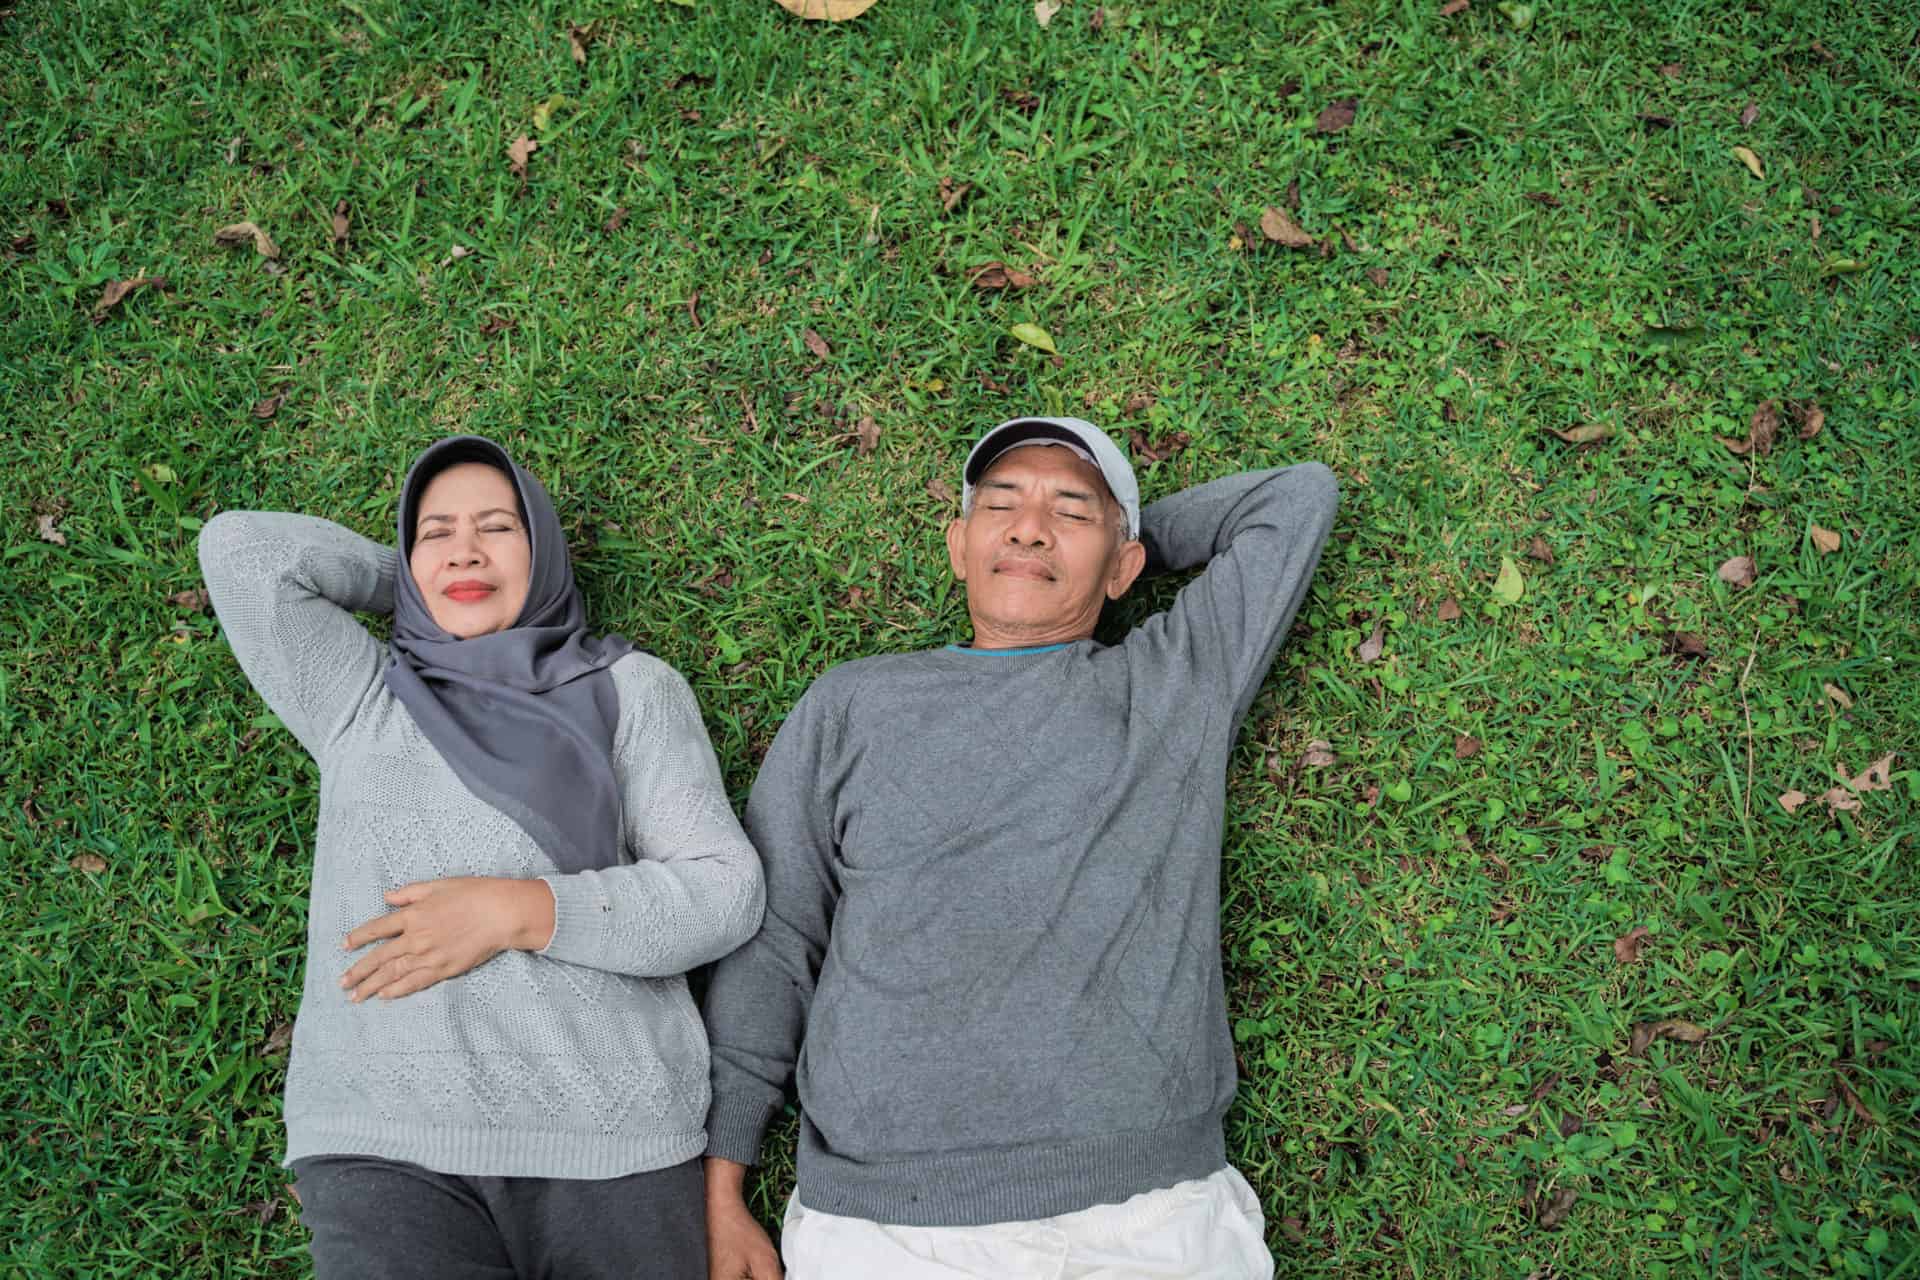 muslim senior man and woman relaxing and laying down on grass in the park